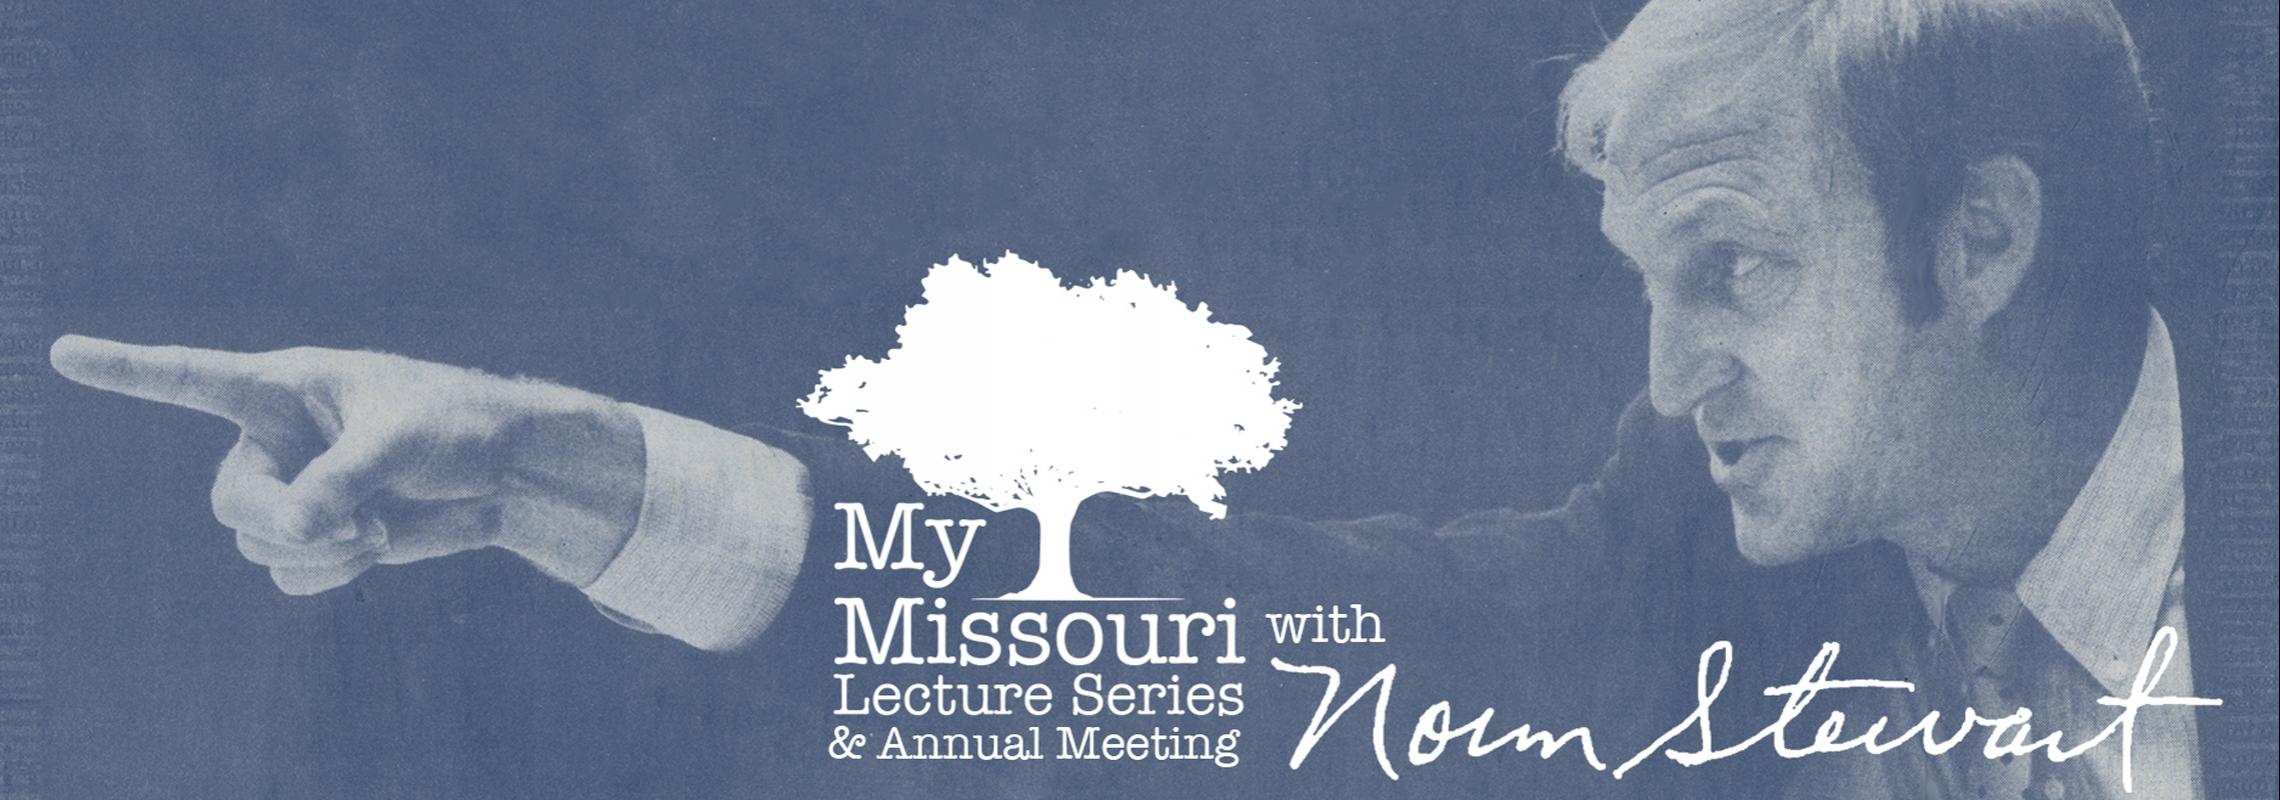 My Missouri Lecture with Norm Stewart